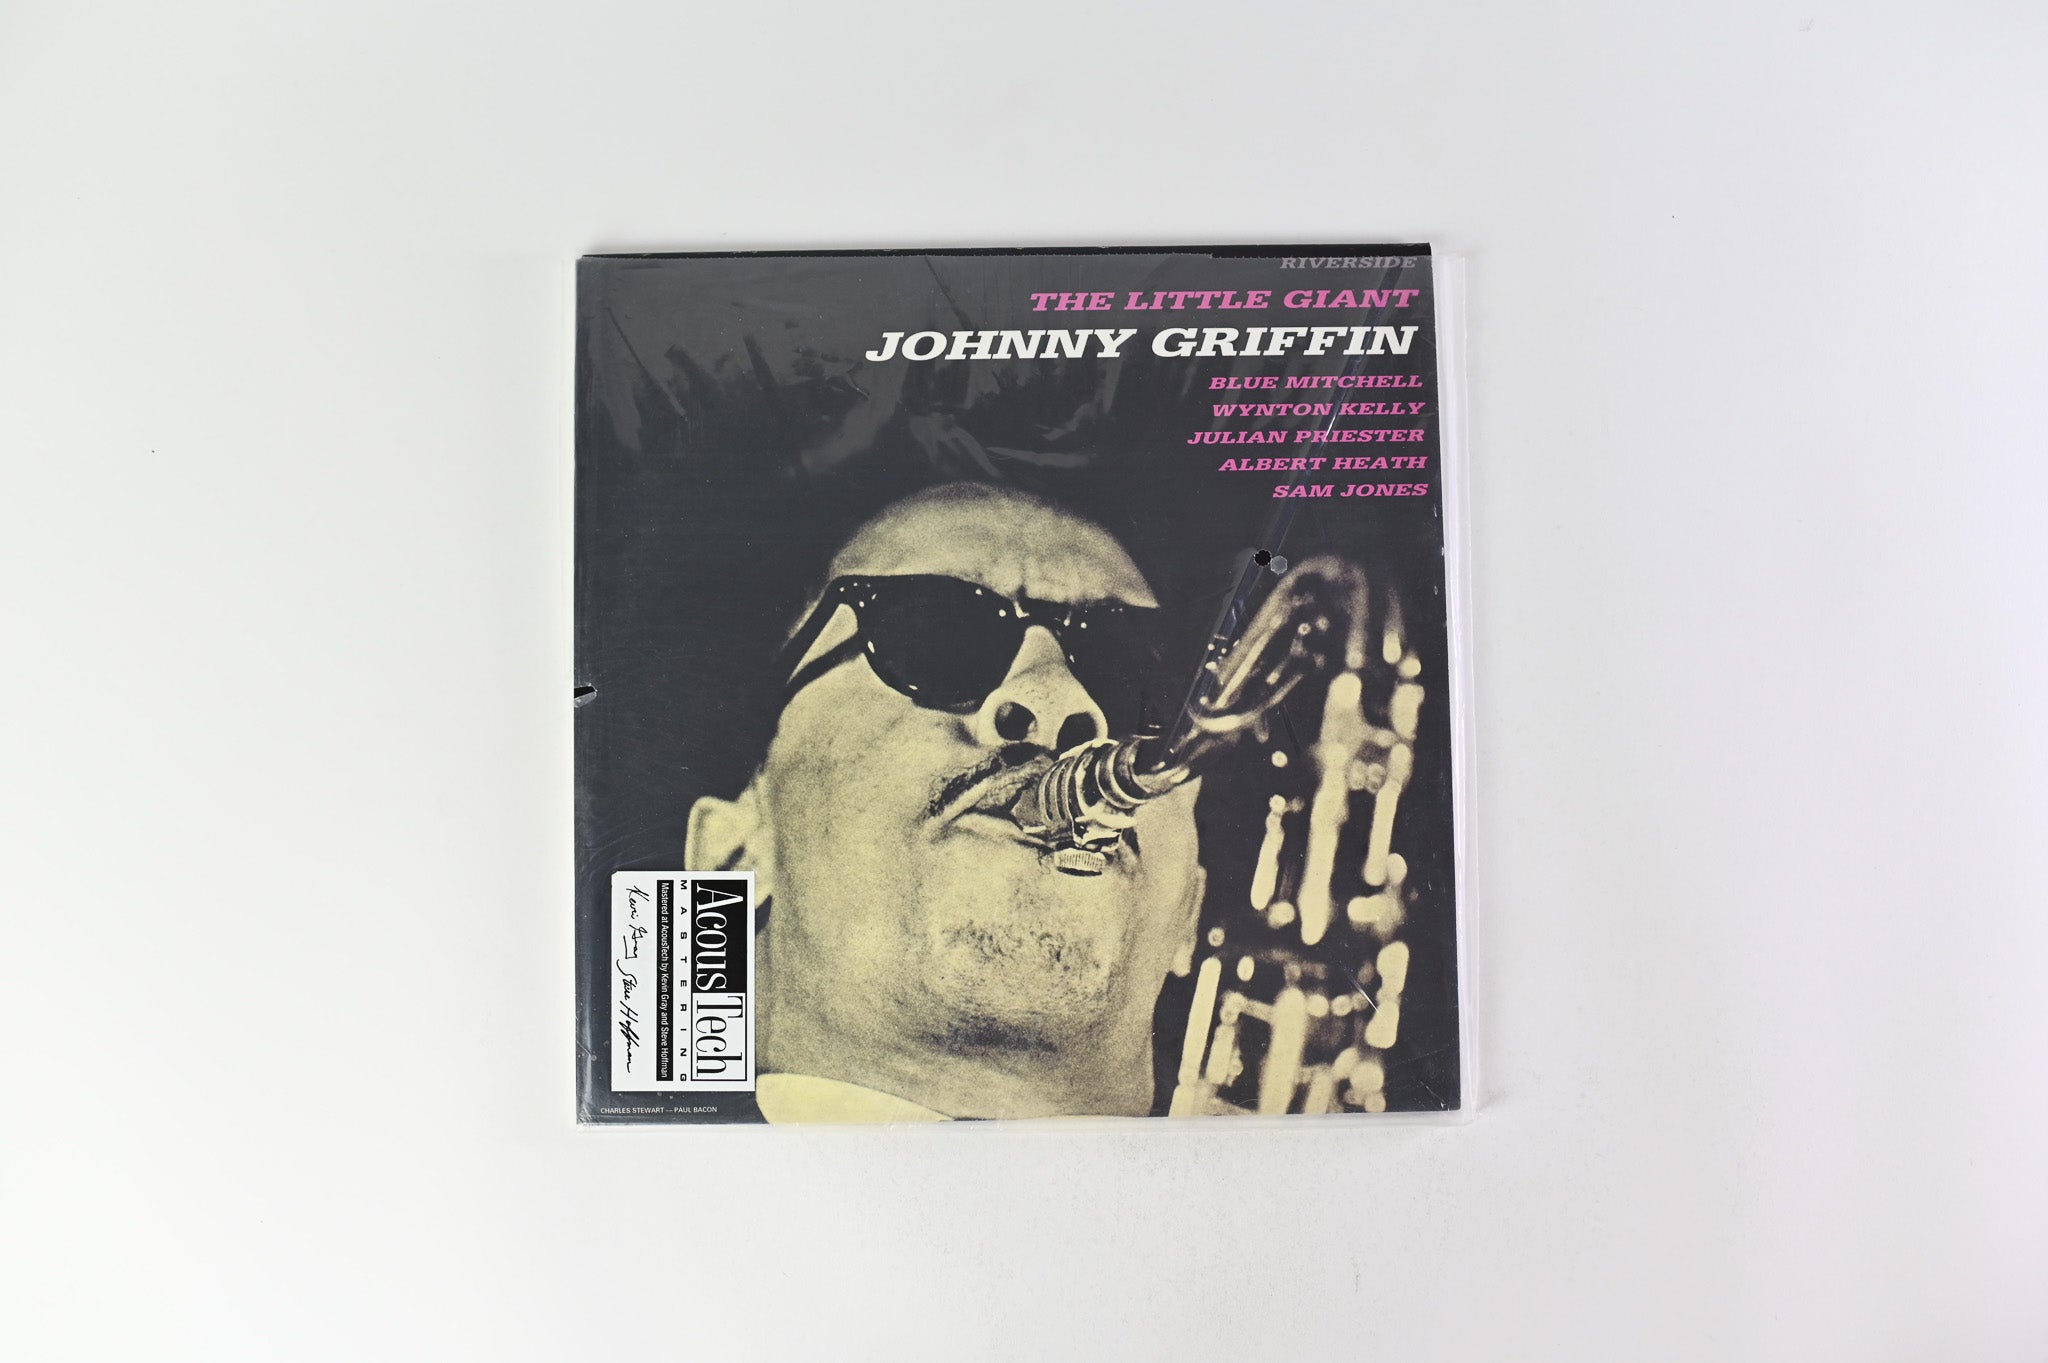 Johnny Griffin - The Little Giant on Analogue Productions 45 RPM